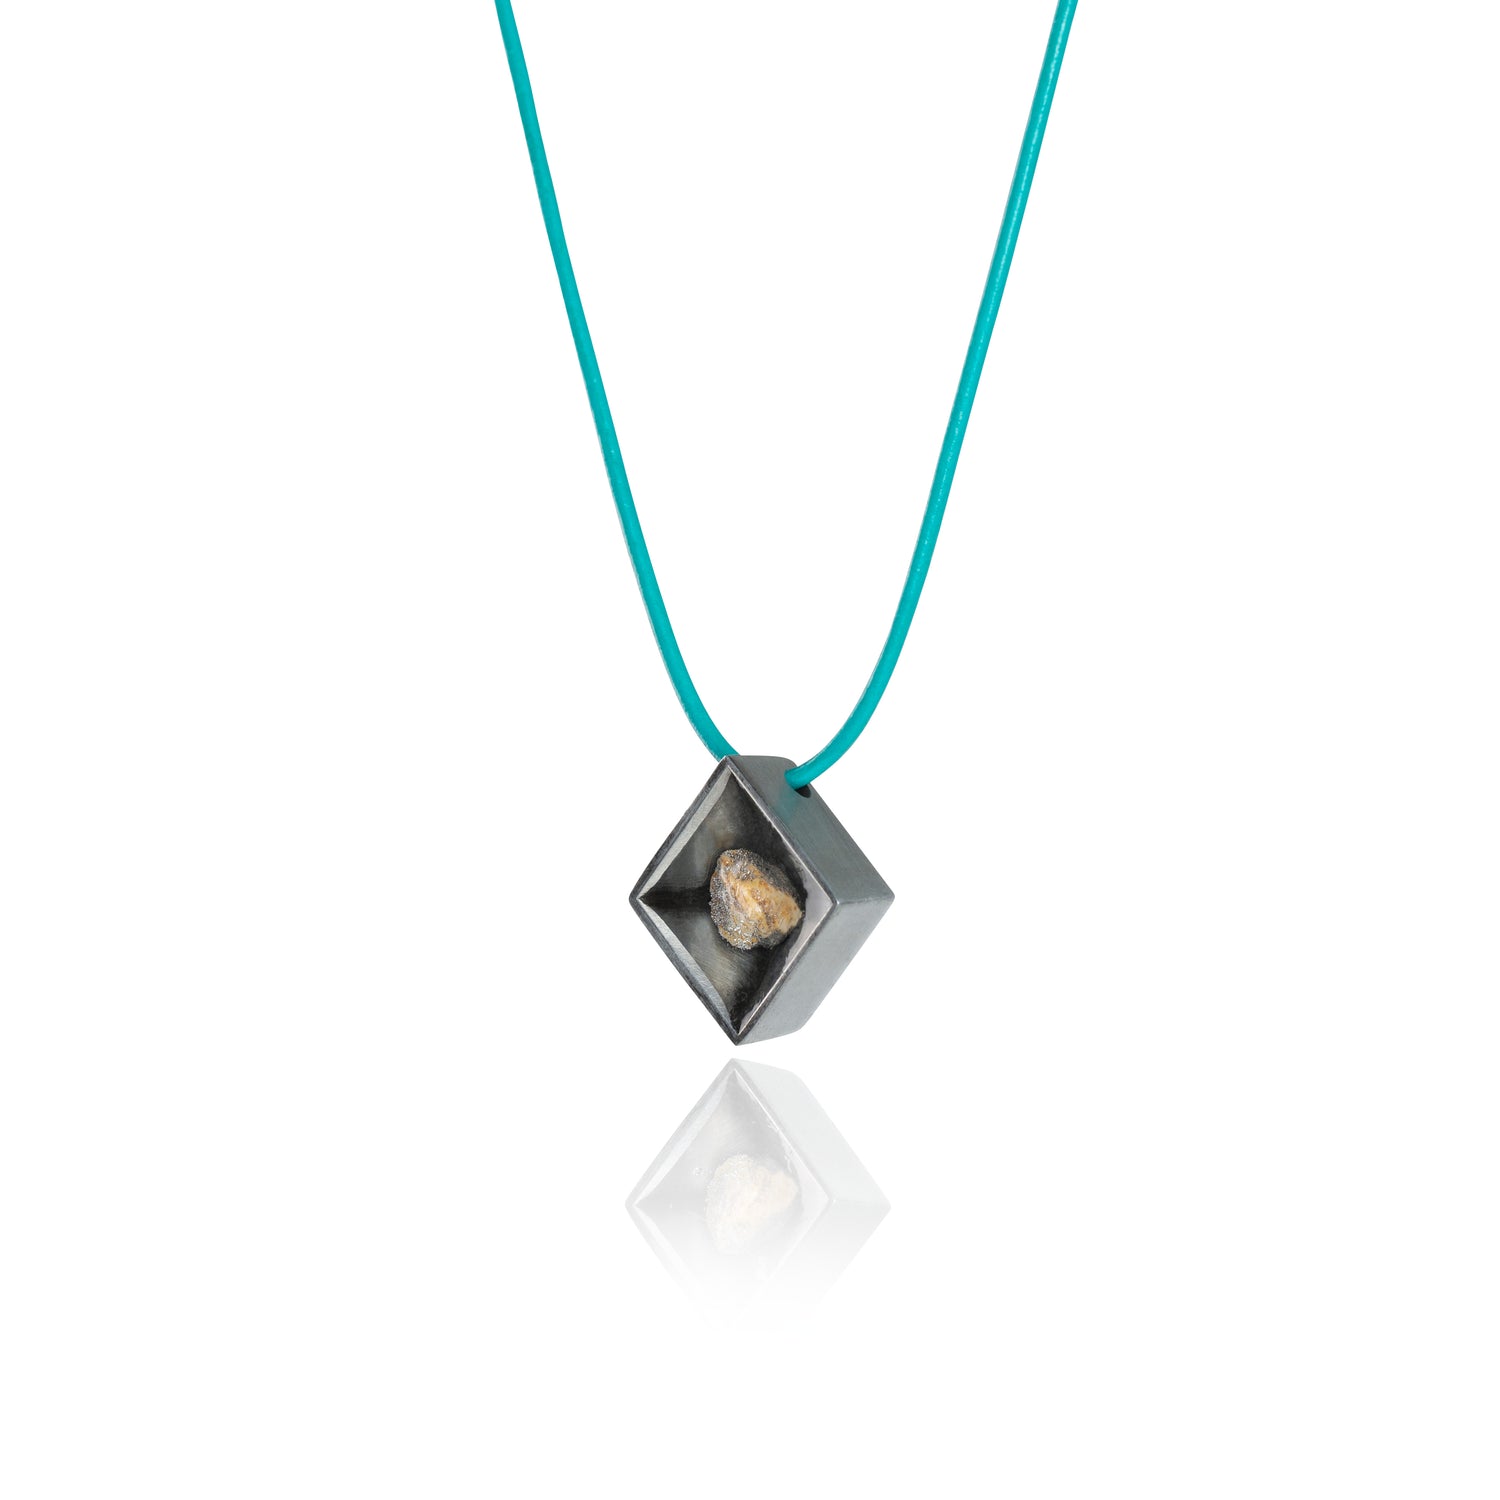 A side view of a small natural multicolored stone siting in the middle of a diamond shaped metal pendant in a dark silver color. The pendant is hanging on a turquoise leather necklace. 